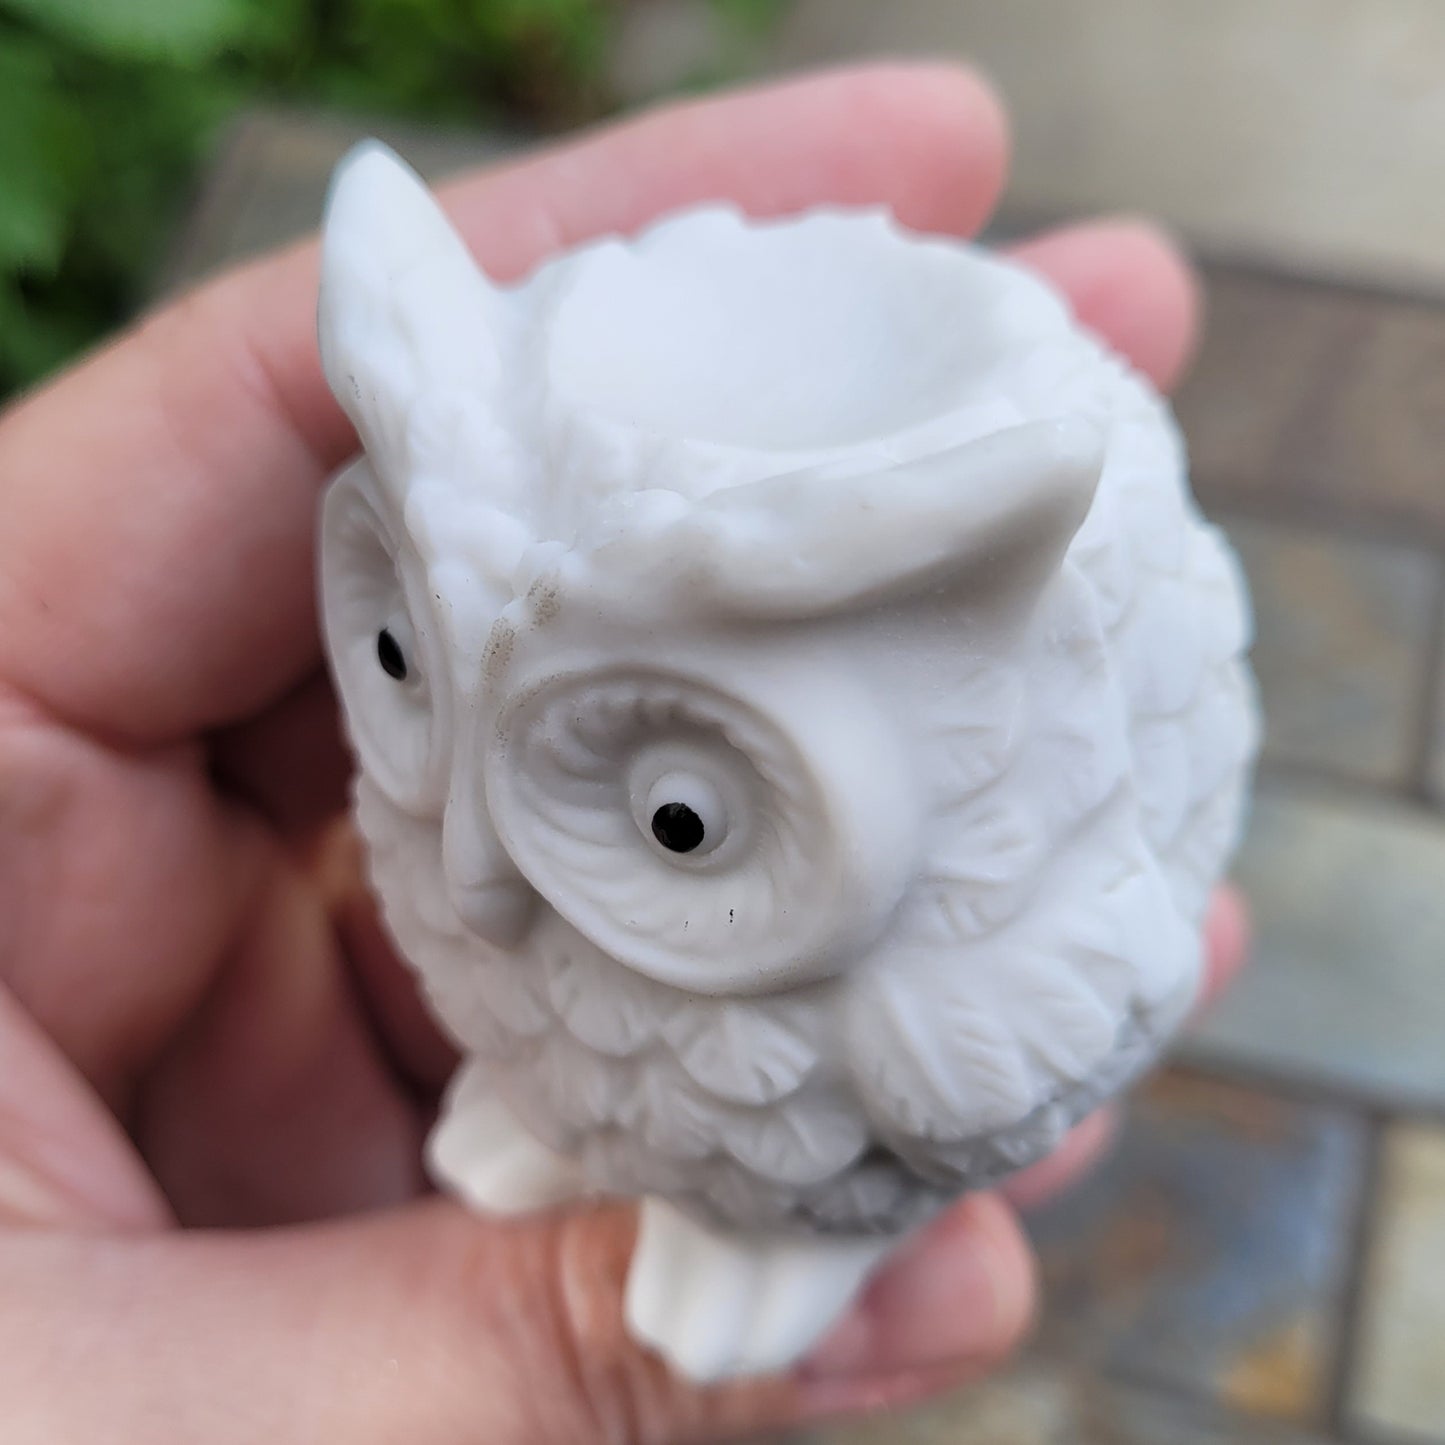 Owl Sphere Stand in White, For Spheres, Eggs Balls from 1" to 2.8" (25mm to 70mm)